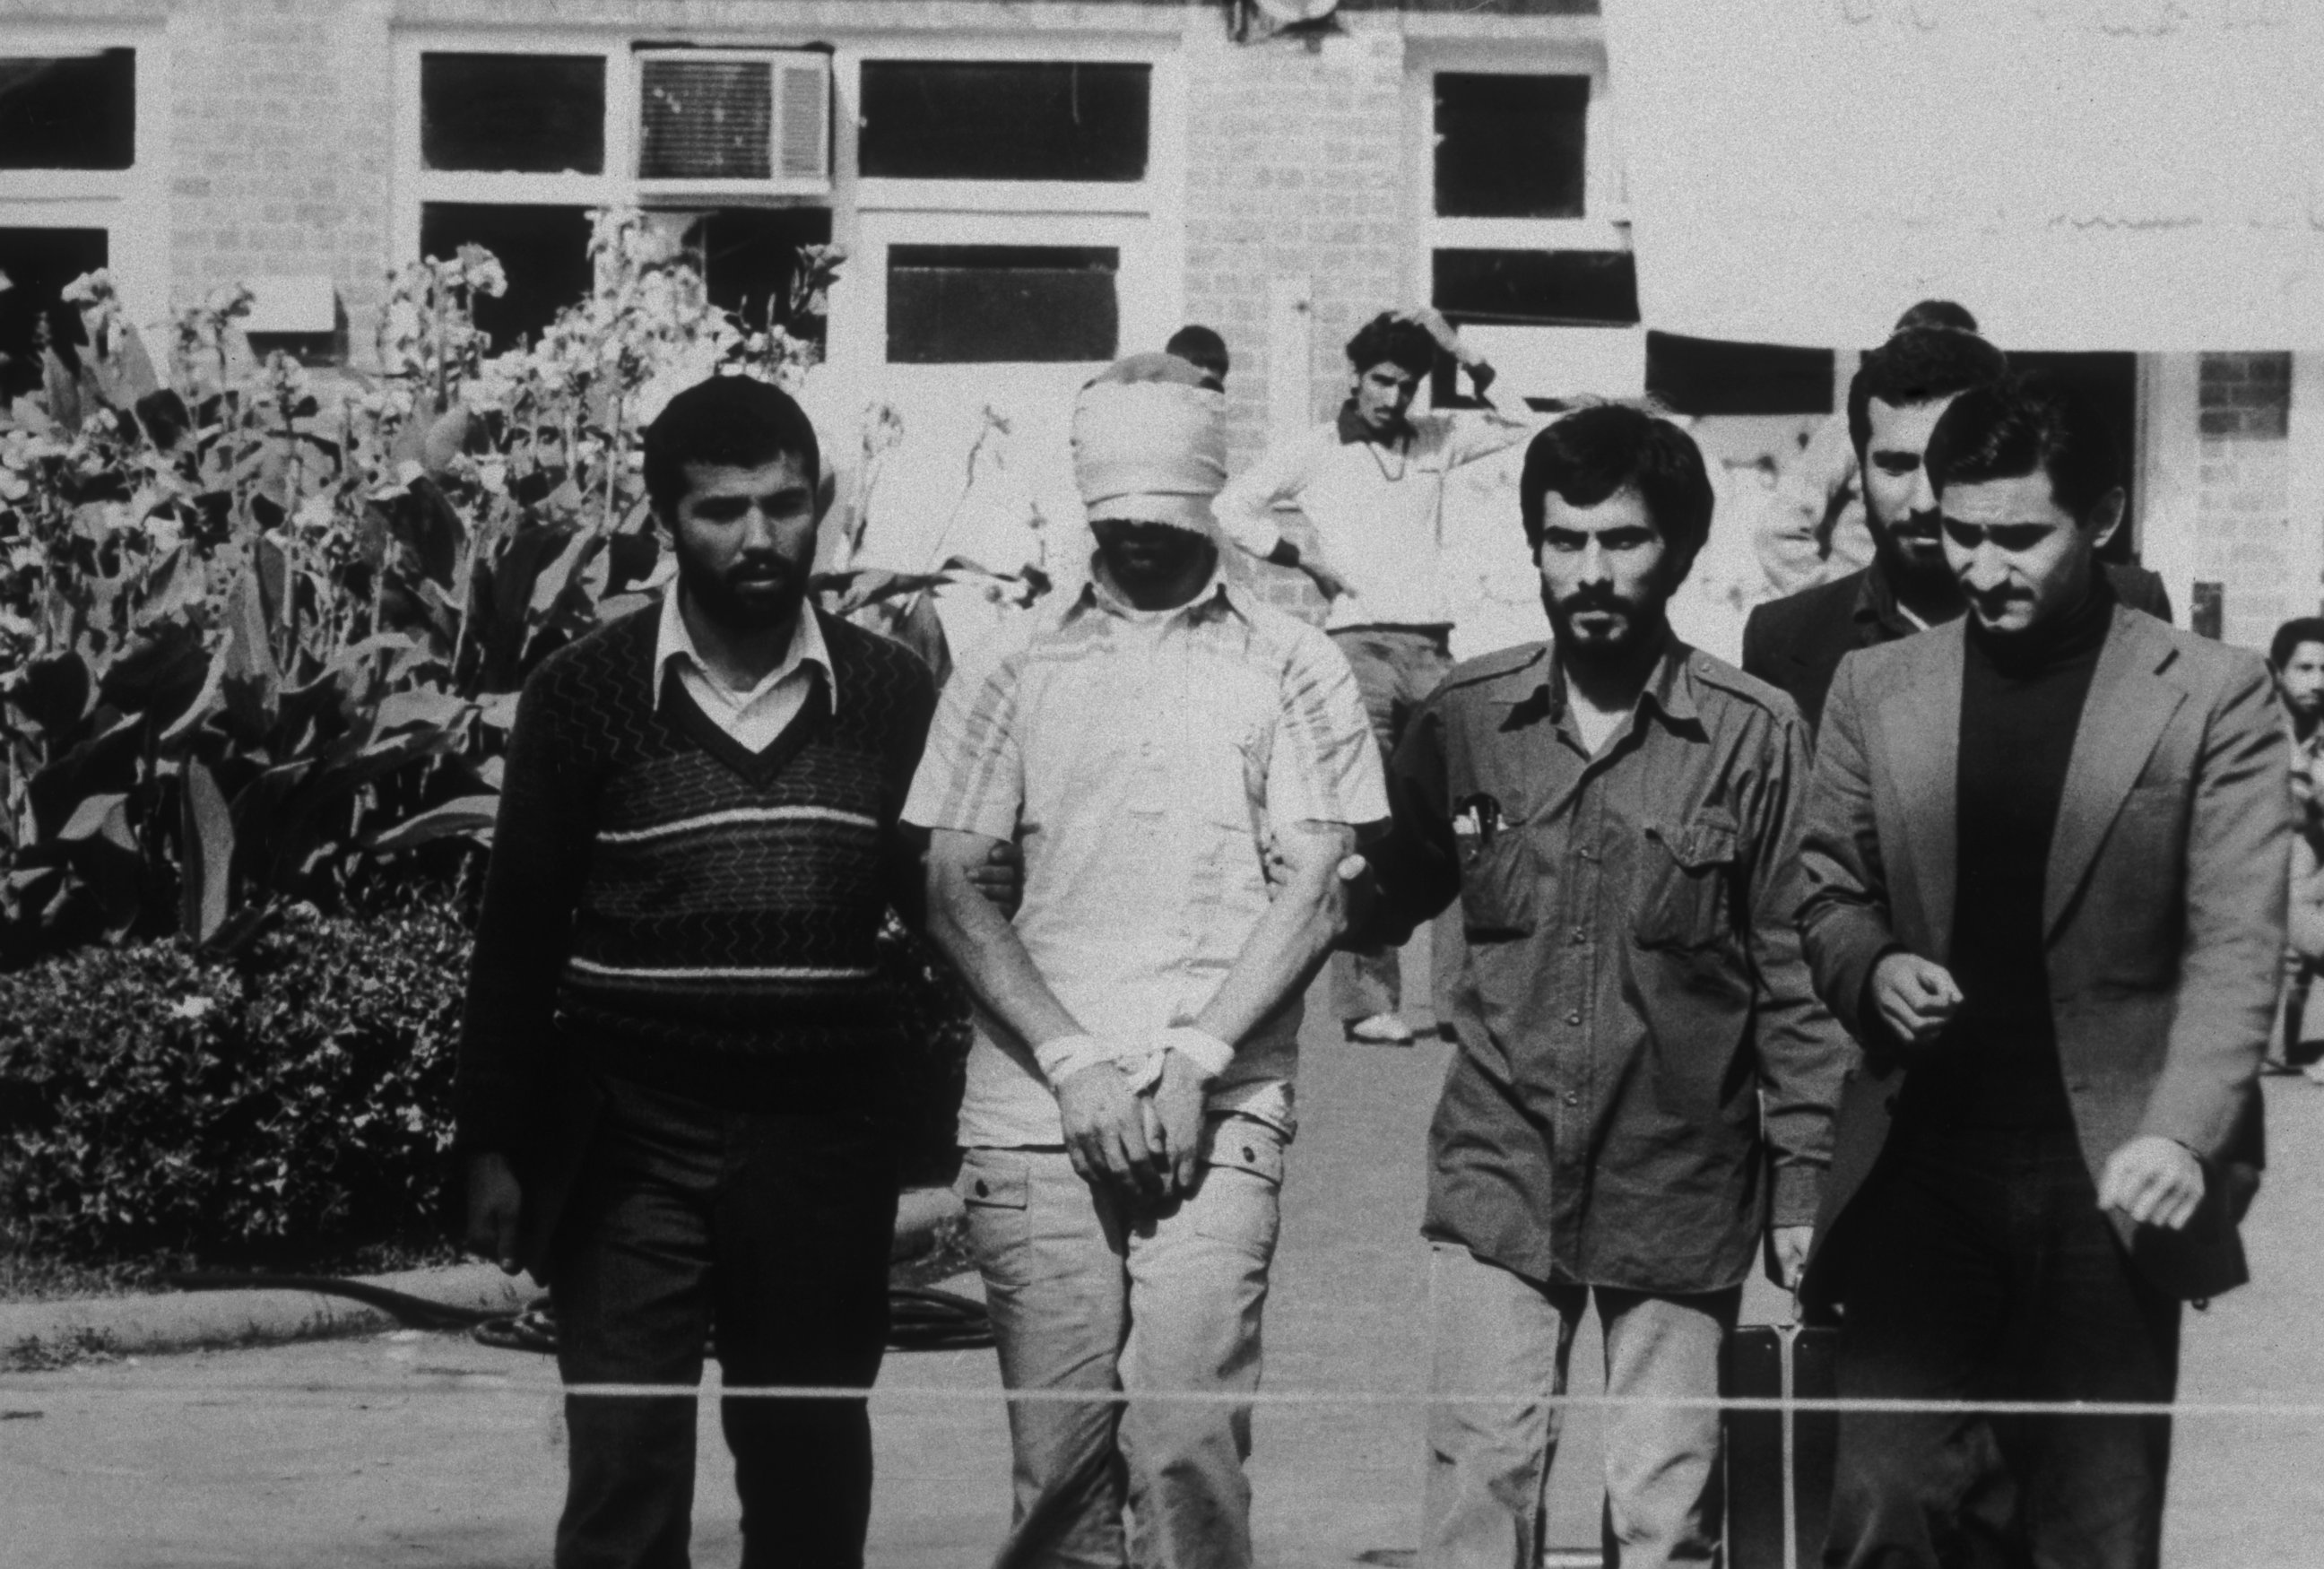 PHOTO: An American hostage being paraded before the cameras by his Iranian captors in Tehran, Iran, 1979.